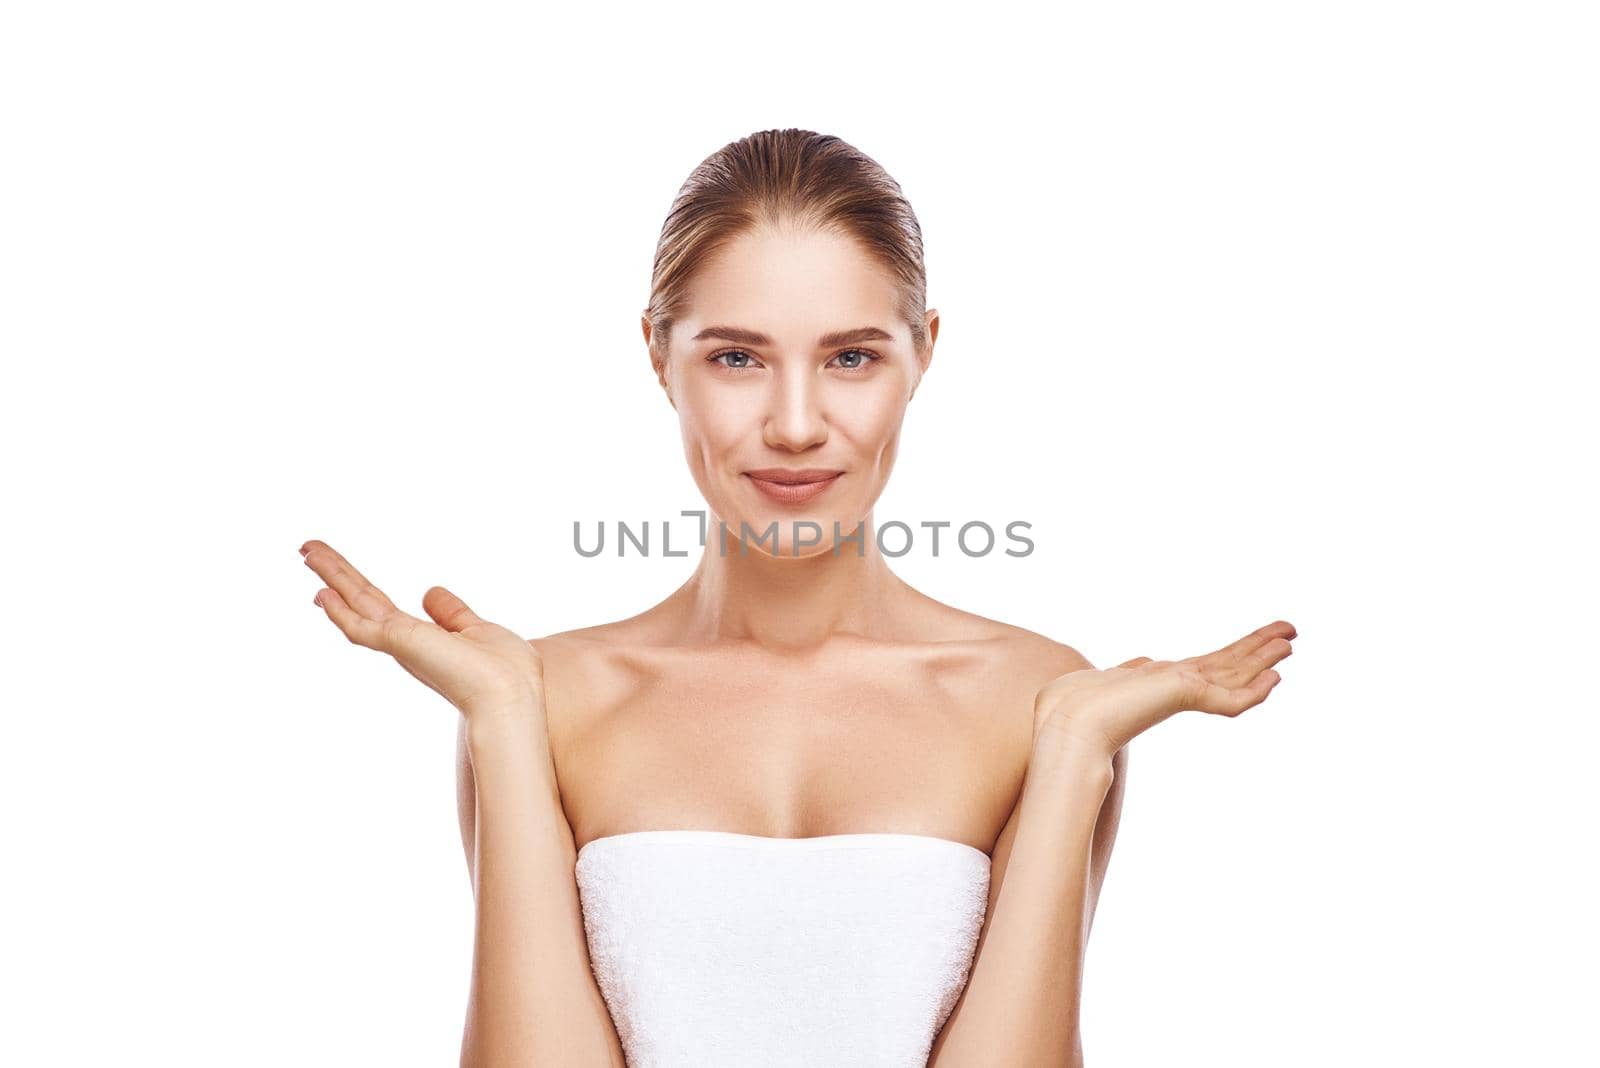 Beautiful womans face and hands, close-up studio photo on white background. Light hair, grey eyes. She is wearing white towel